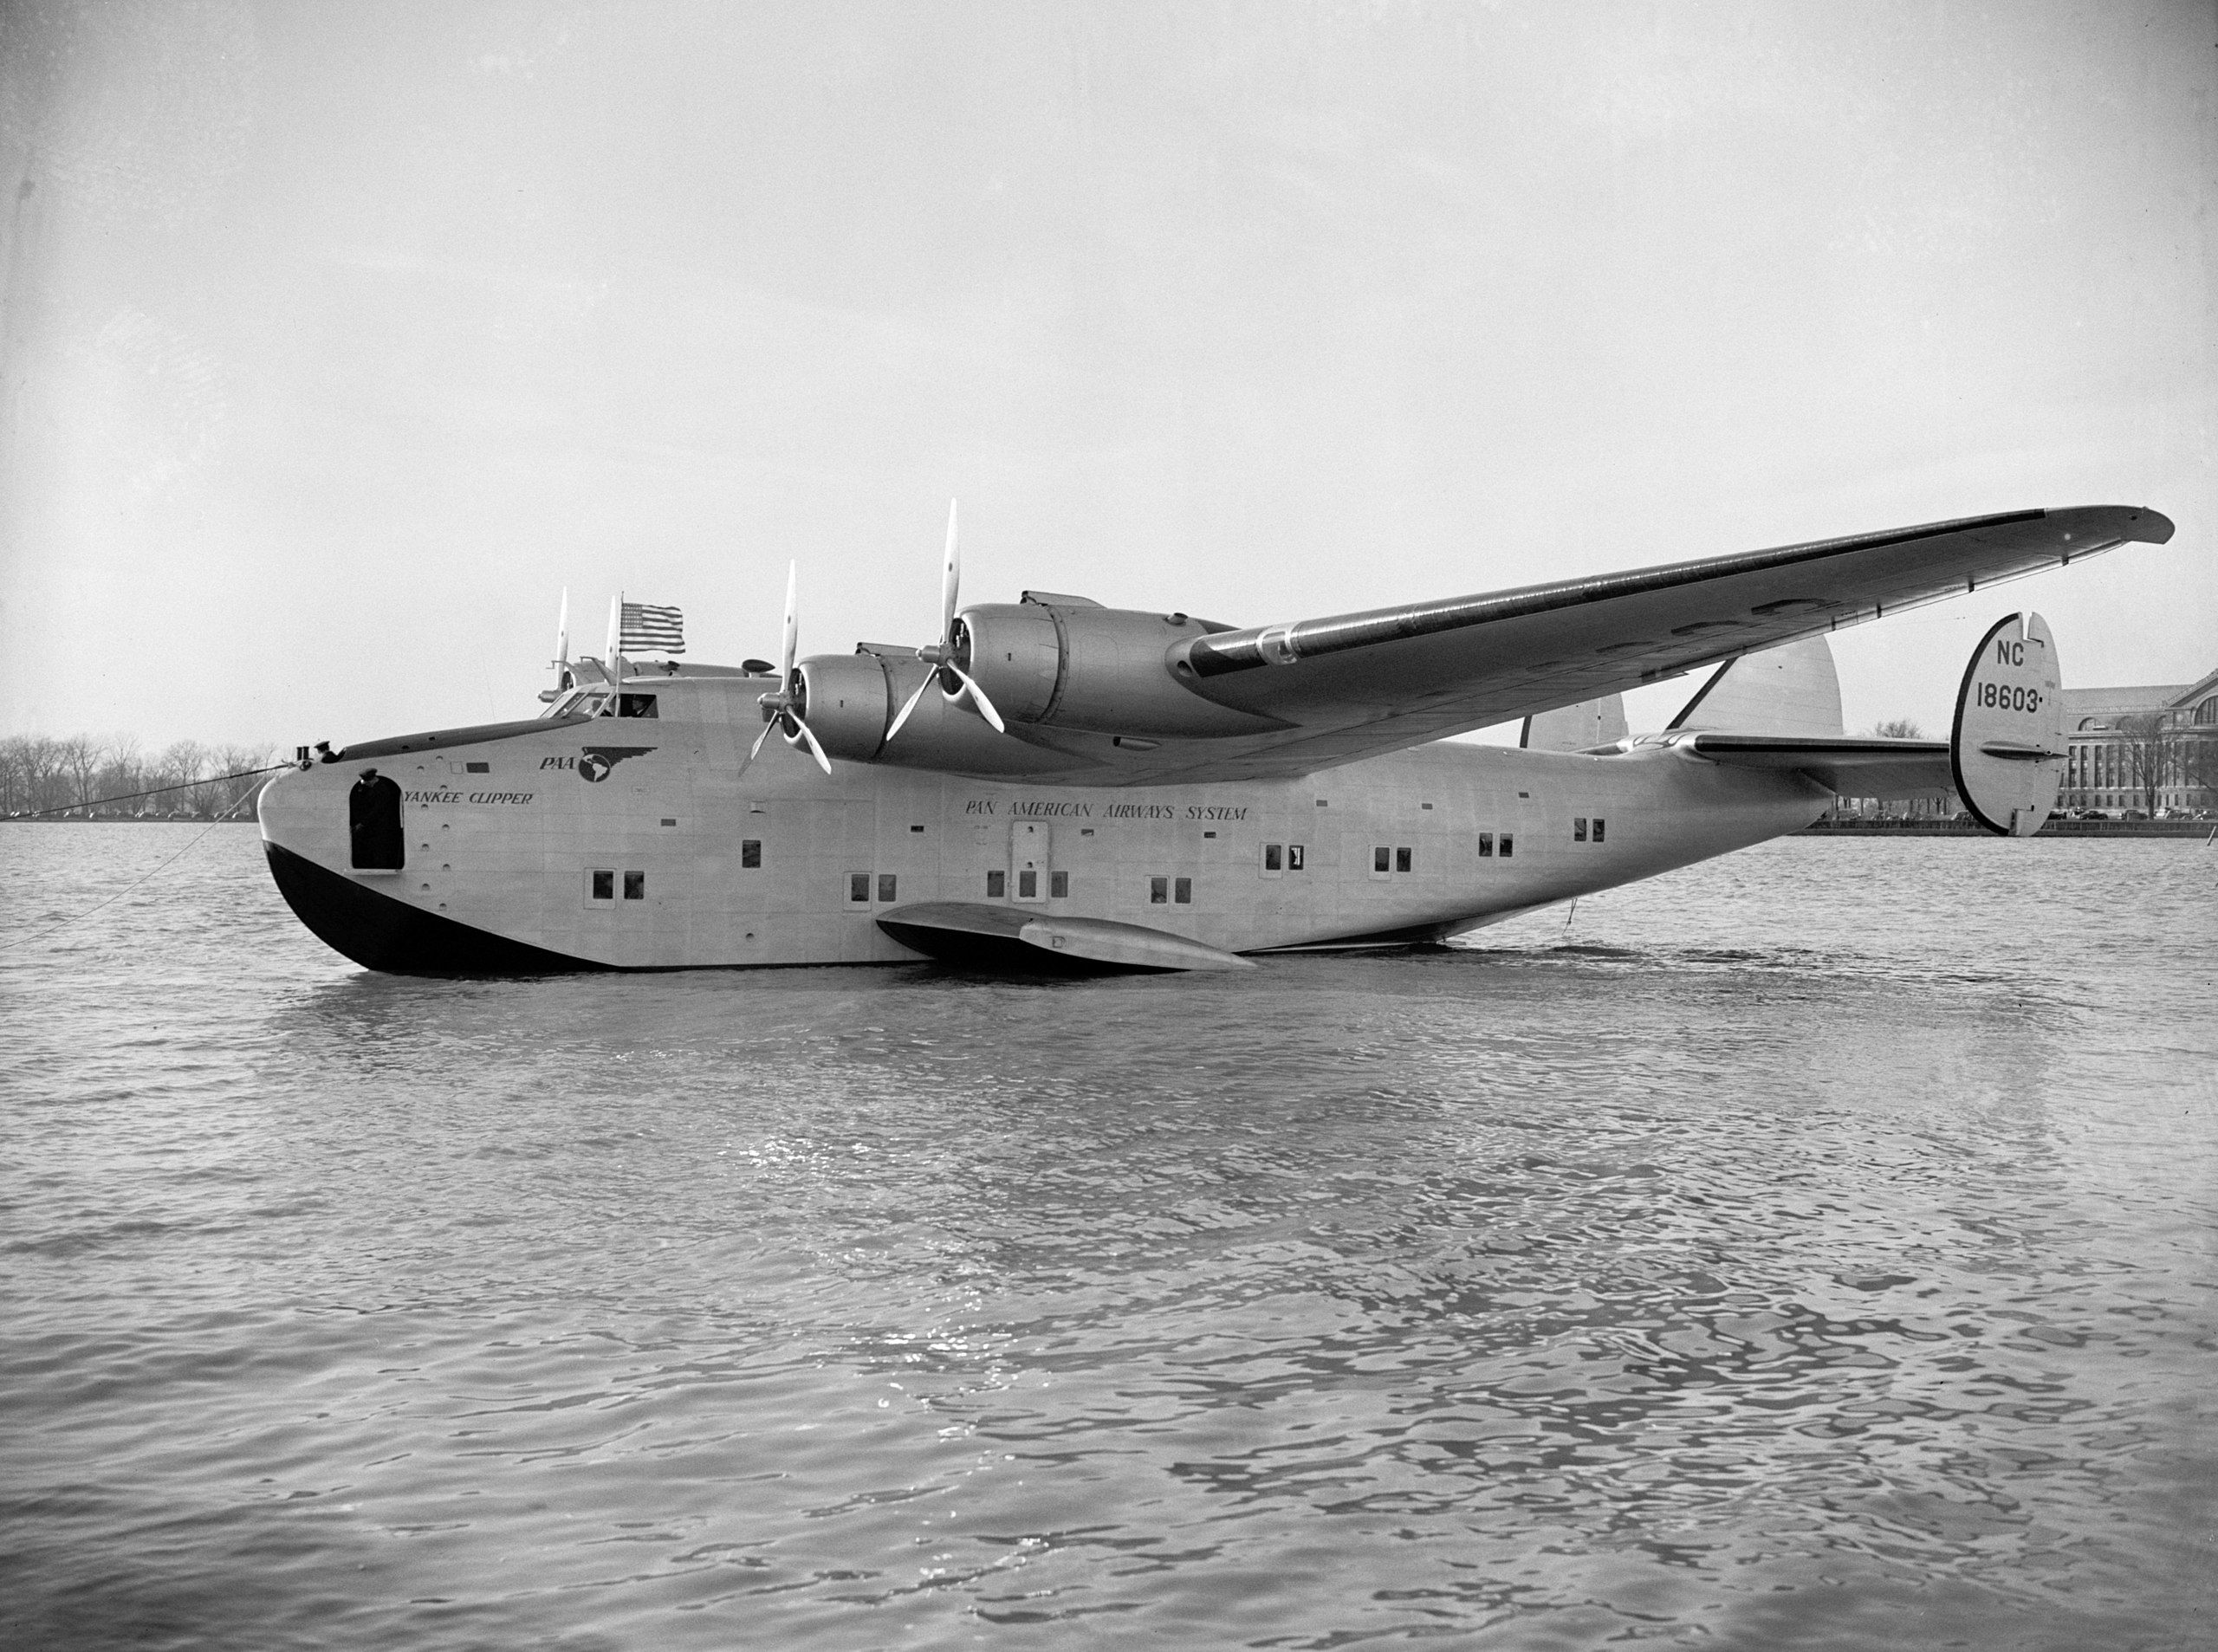 A Boeing 314 Yankee Clipper parked in water.